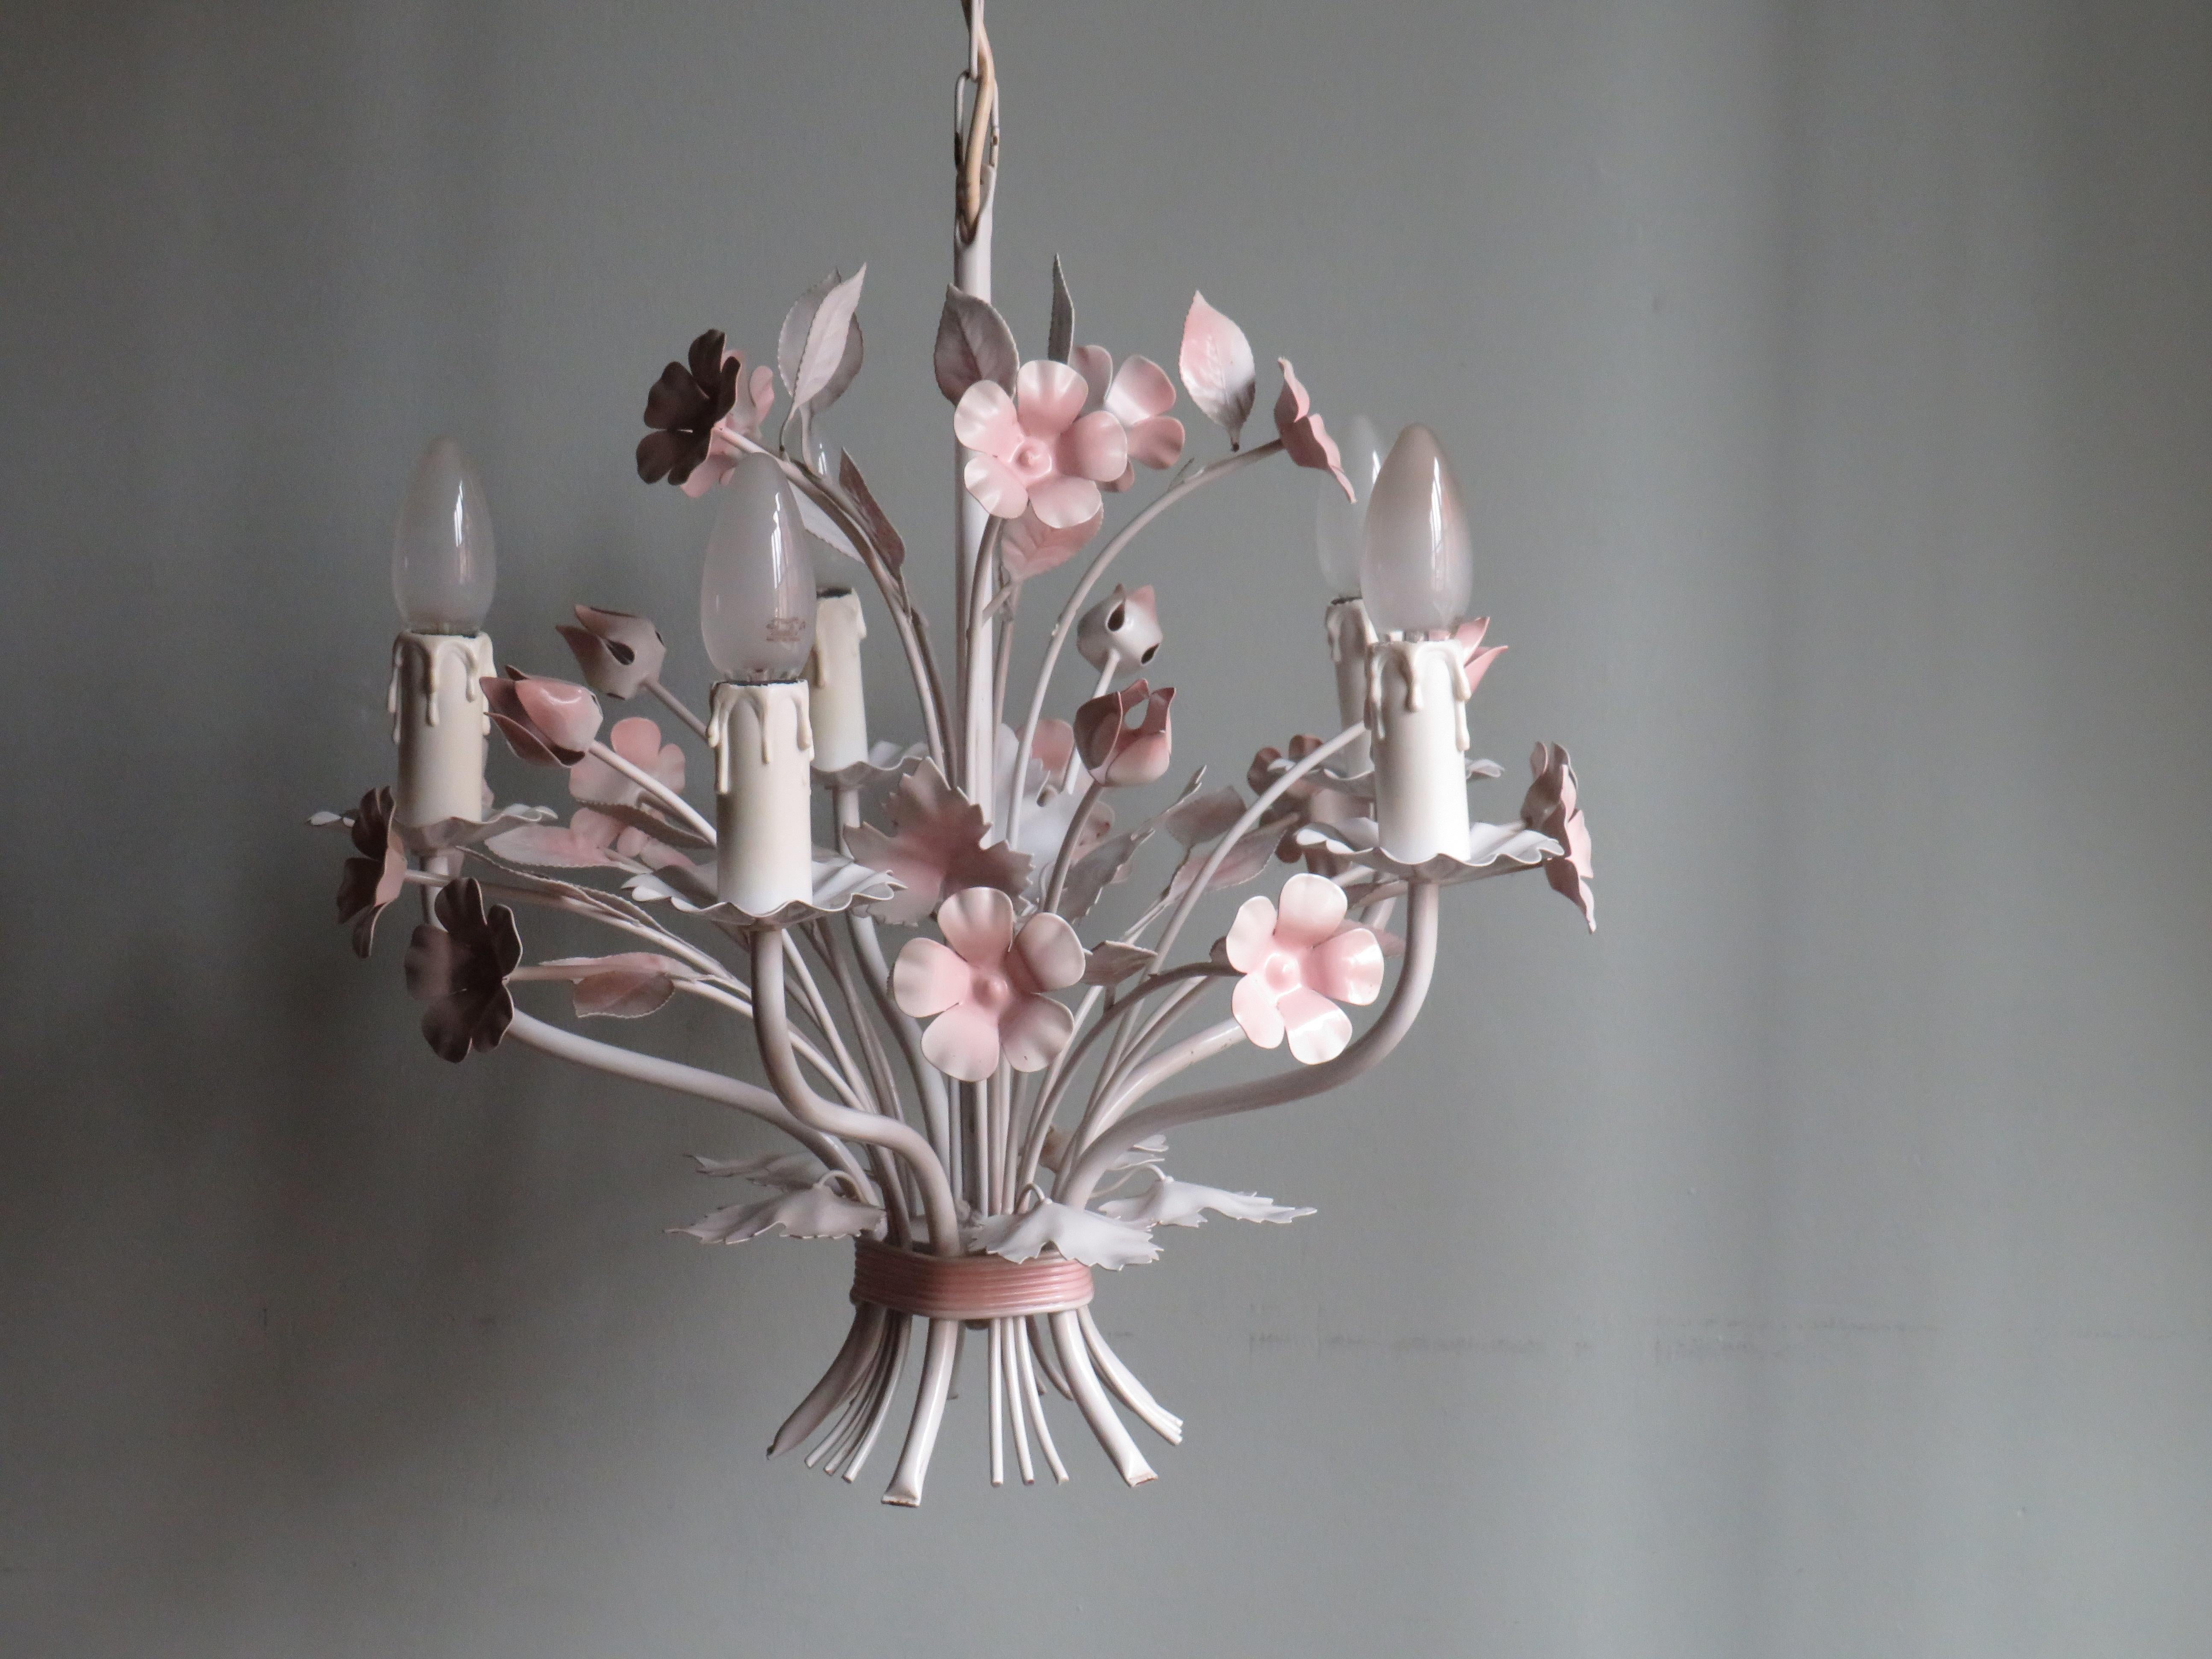 Italian Vintage Toleware Chandelier with Floral Motifs, Italy, 1960s For Sale